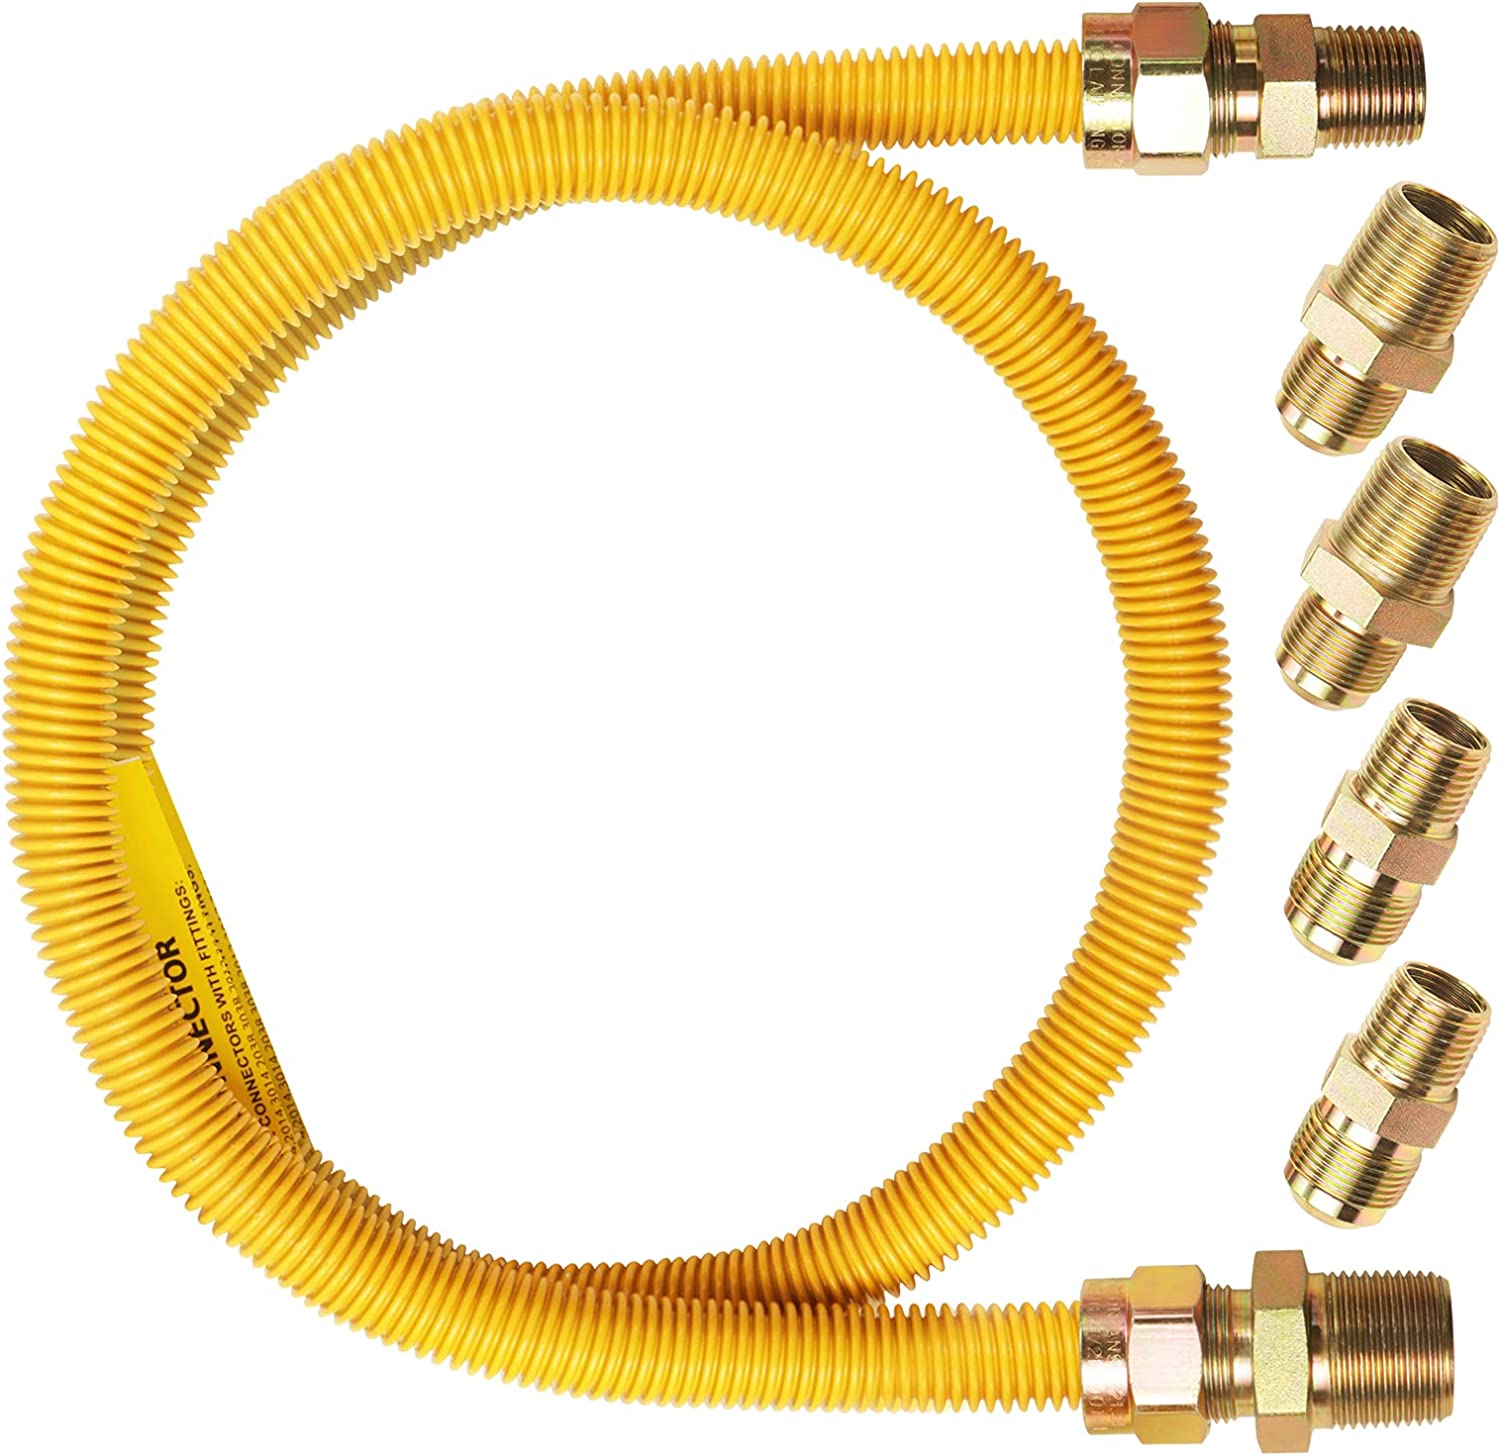 EXCELFU Safety-Shield Gas Appliance Line Flexible Dryer Gas Hose Connector Kit - 5/8 In. OD (1/2 In. ID) 1/2 In. MIP X 1/2 In. MIP X 3/4 In. MIP X 48 In. Length Yellow Coated